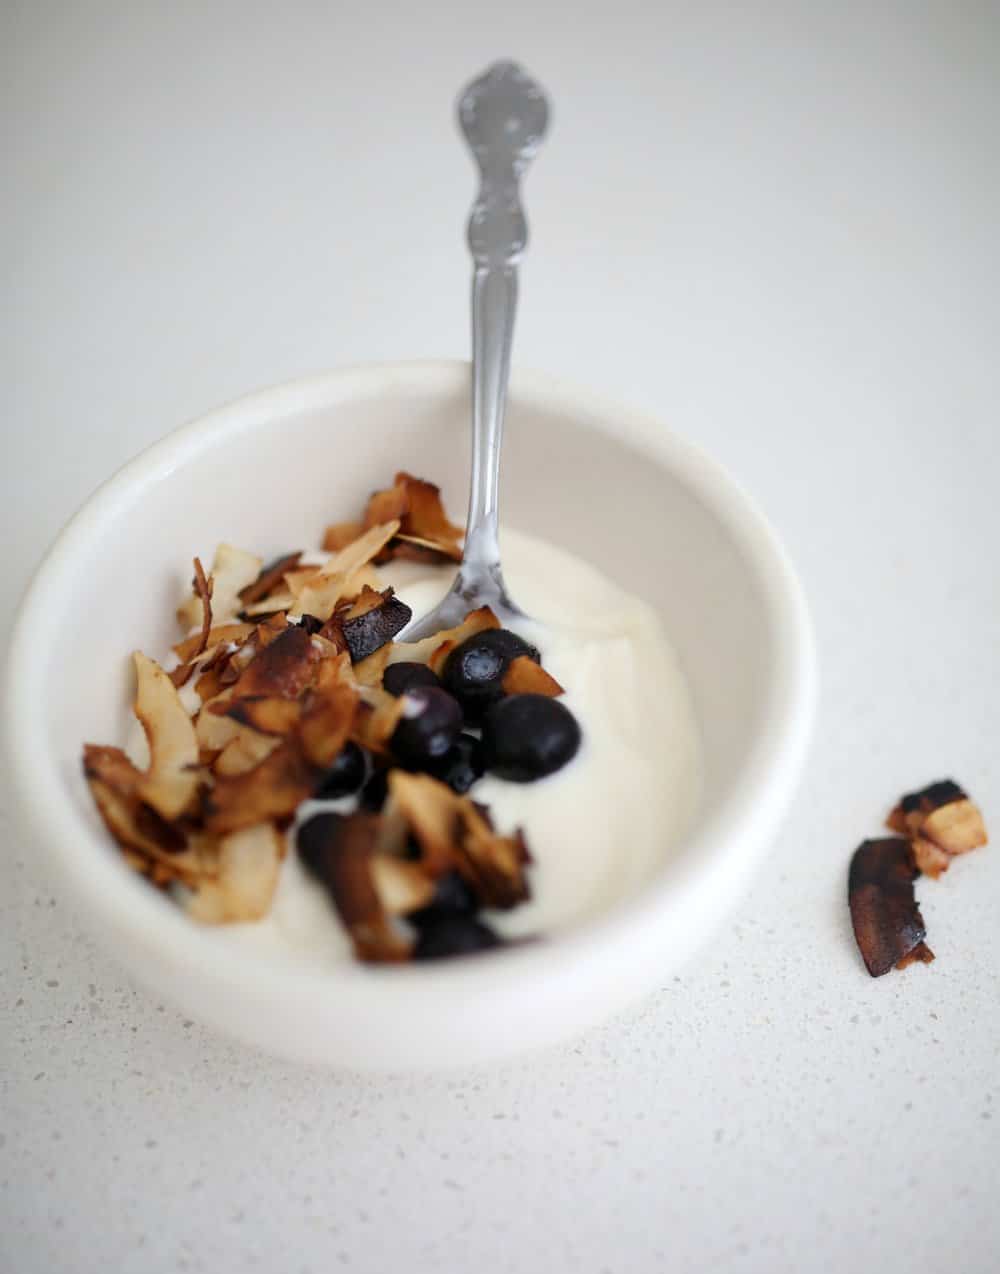 yogurt topped with toasted coconut chips and blueberries in a white bowl with a metal spoon